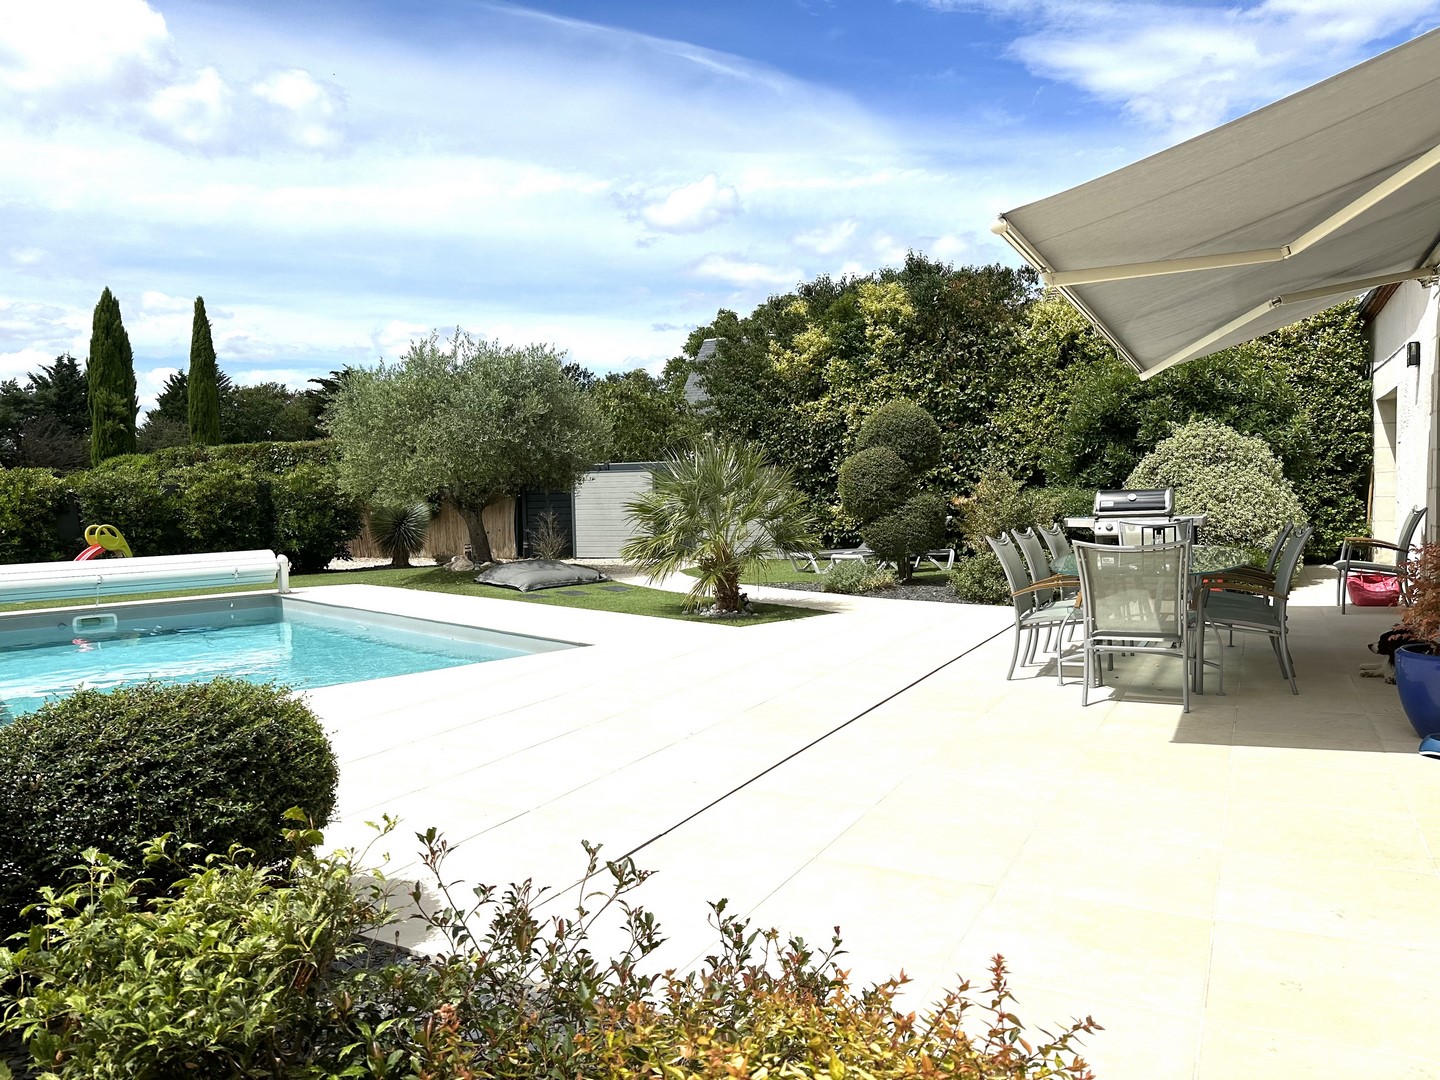 SOUTH TOURS CHARMING RESIDENCE 215m² approx.  HEATED SWIMMING POOL TERRACE GARDEN PARKING